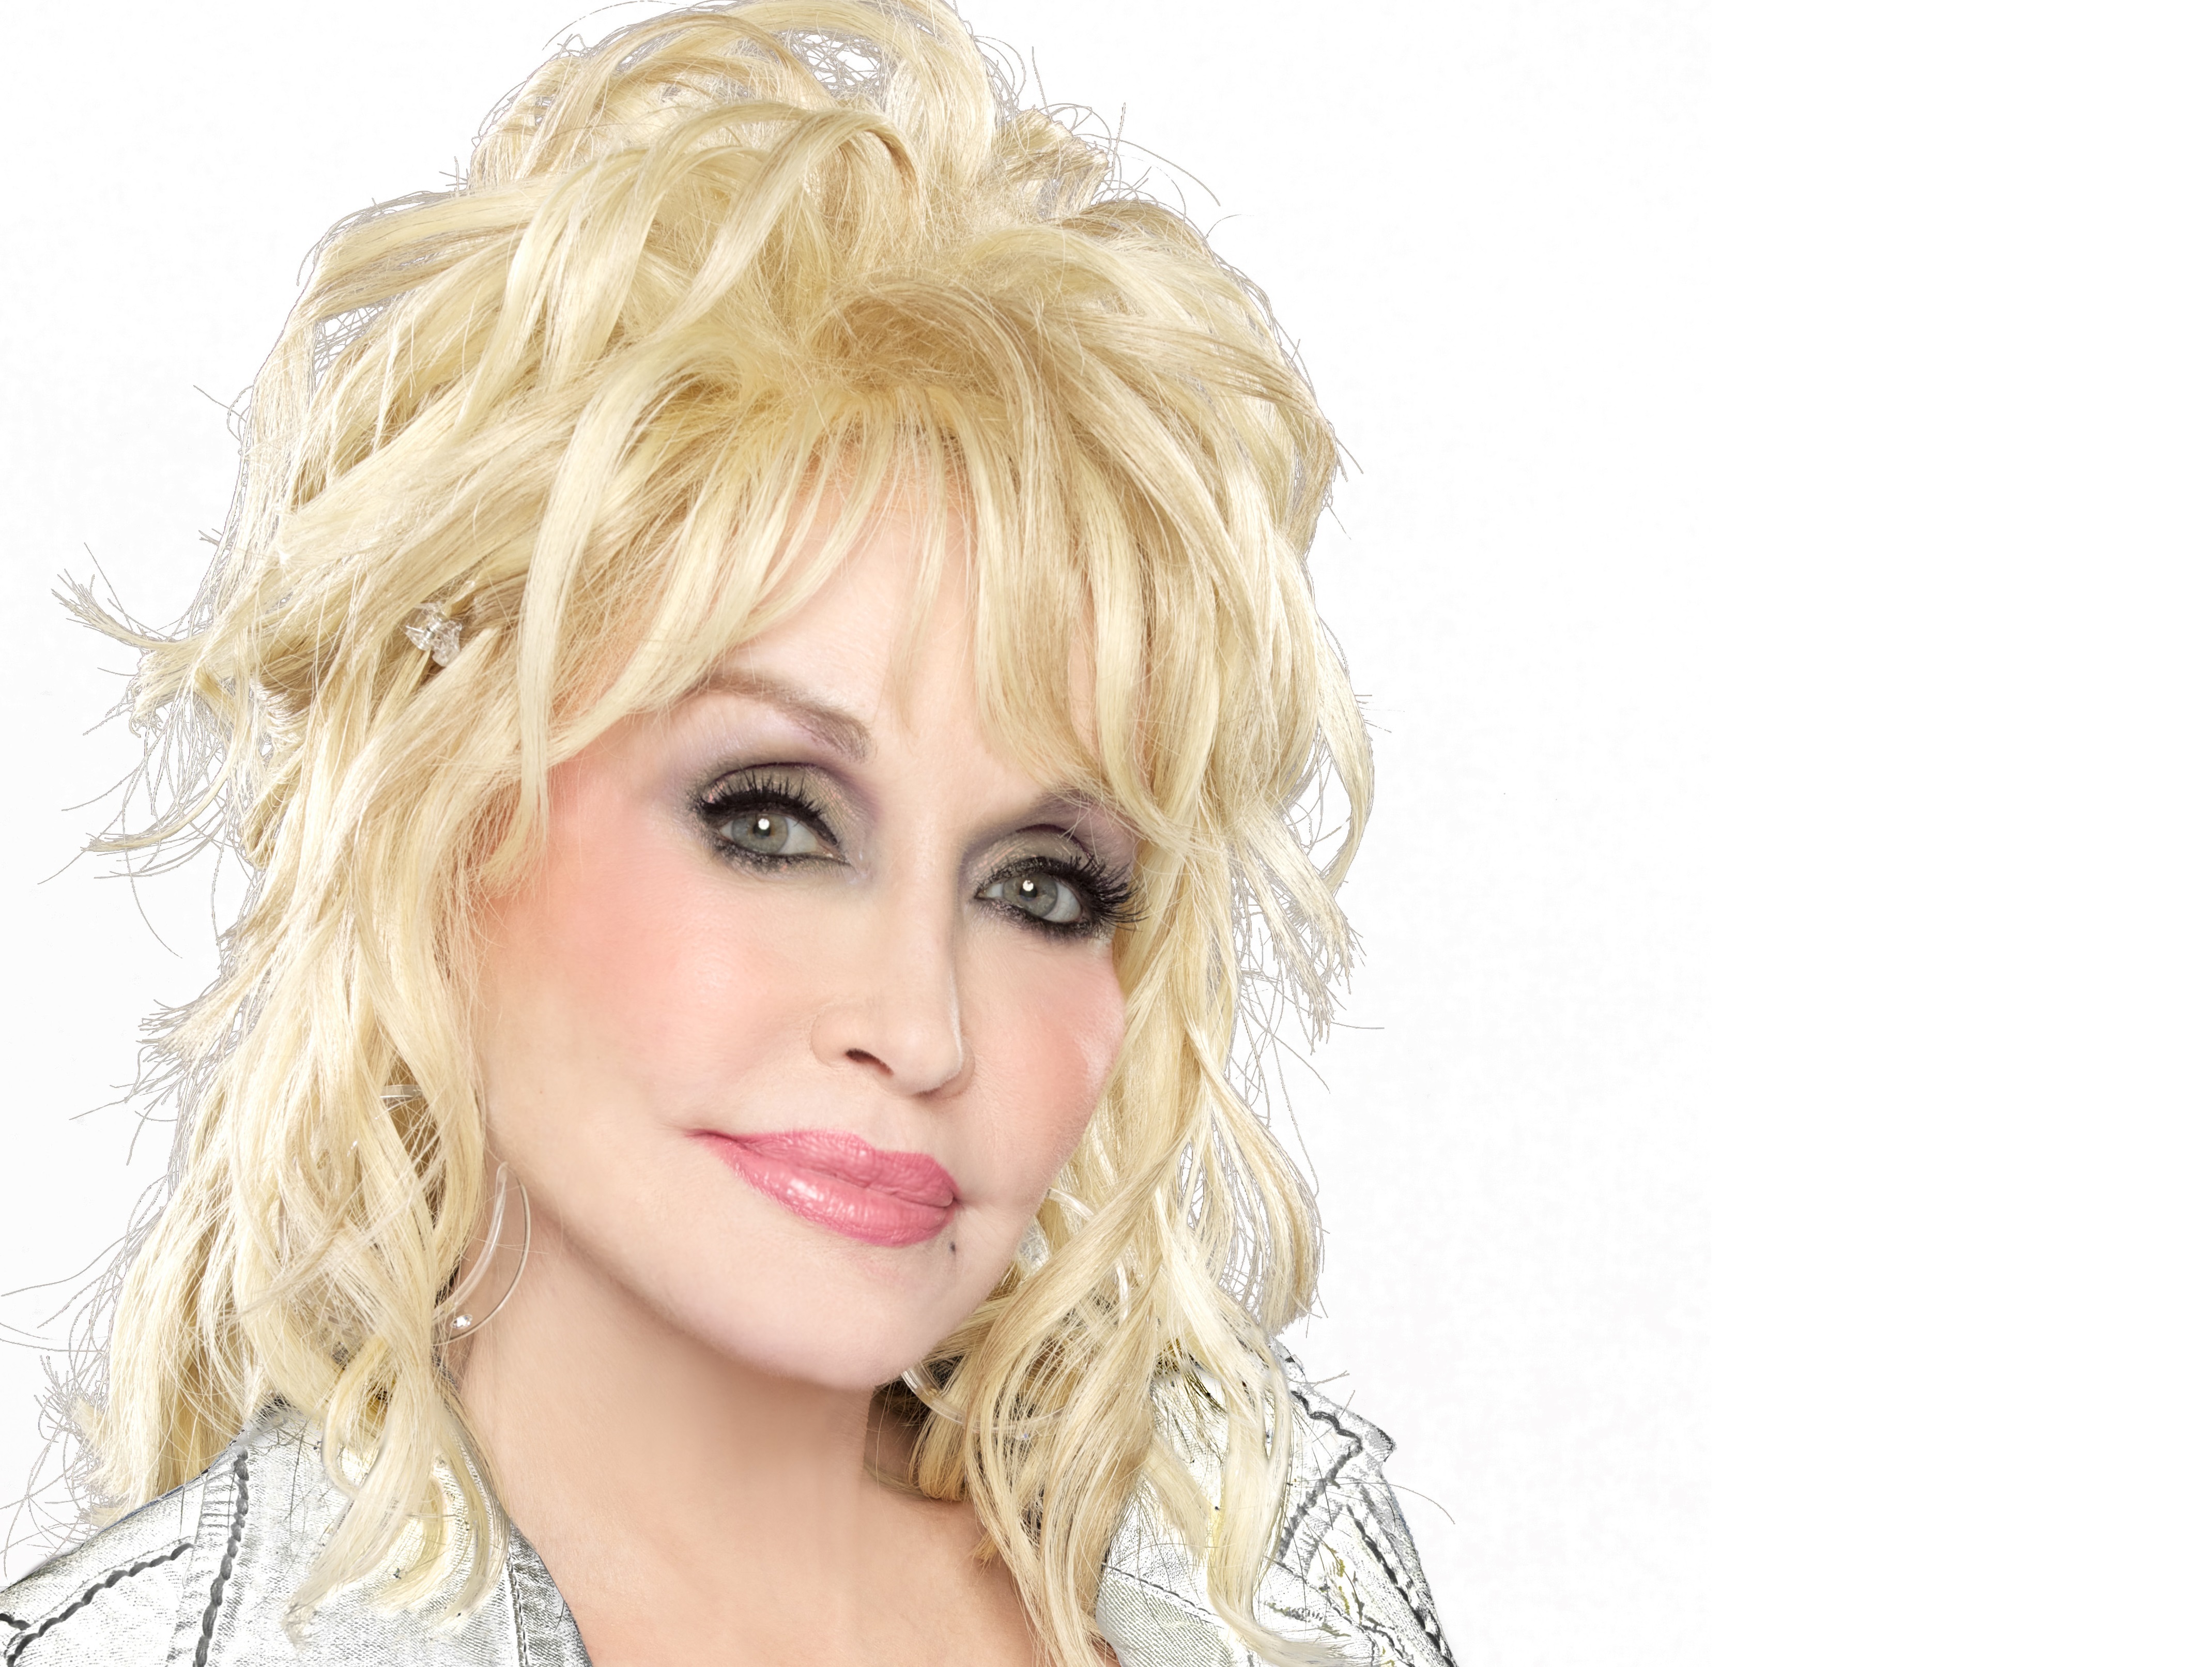 dolly parton wallpapers high quality download free on dolly parton wallpaper